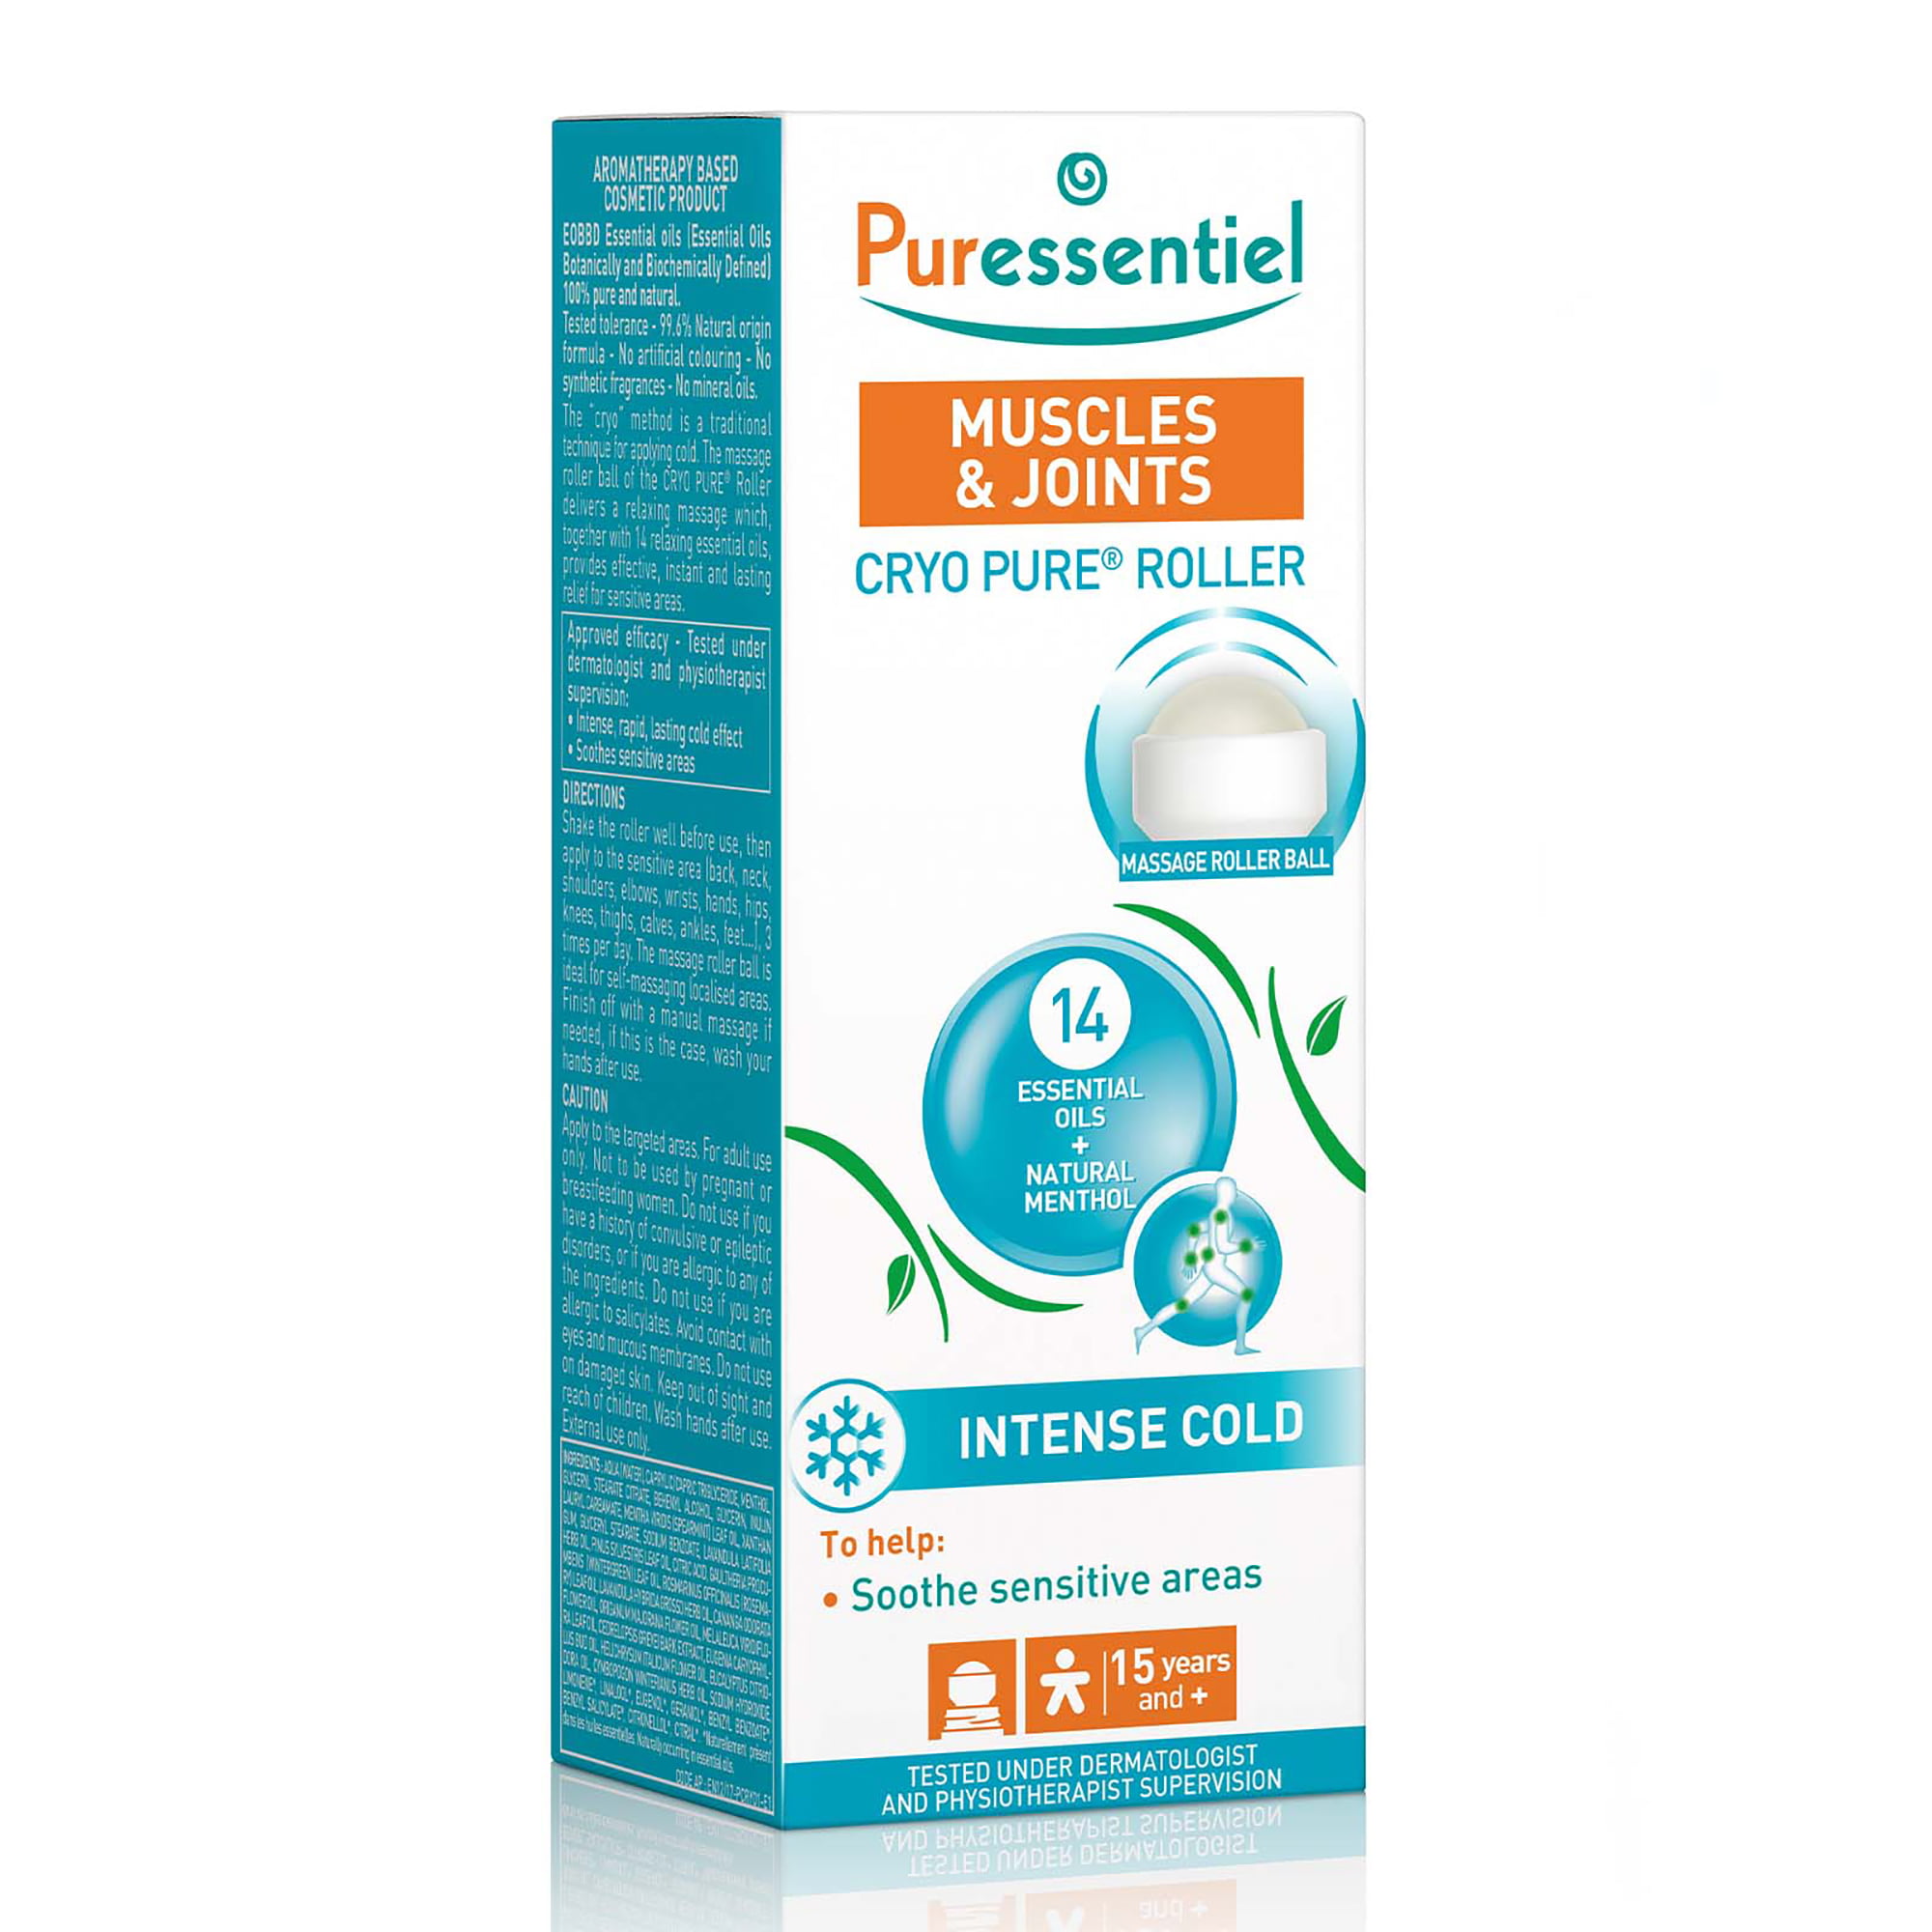 Puressentiel Muscles & Joints Cryo Pure Gel Intense Cold for Instant Relief  - 100% Natural Active Ingredient Vegan - 14 Pure Essential Oils - 2.7 fl oz